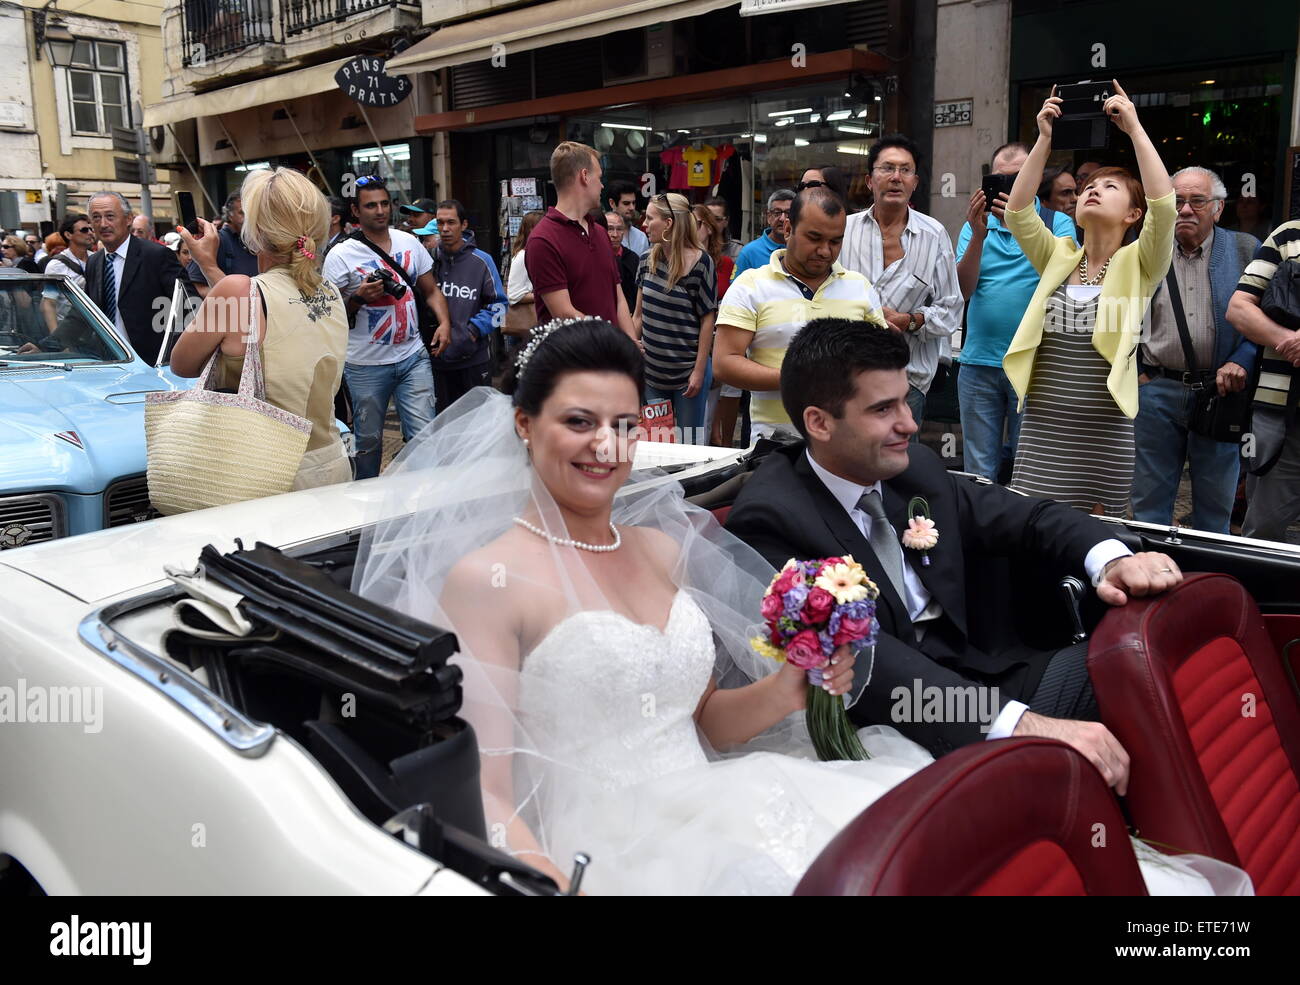 (150613) -- LISBON, June 13, 2015 (Xinhua) -- A couple of newly-weds participates in a group wedding in Lisbon, Portugal, on June 12, 2015. A total of 11 couples married during a group wedding at Lisbon city cathedral Friday. (Xinhua/Zhang Liyun) (zhf) Stock Photo